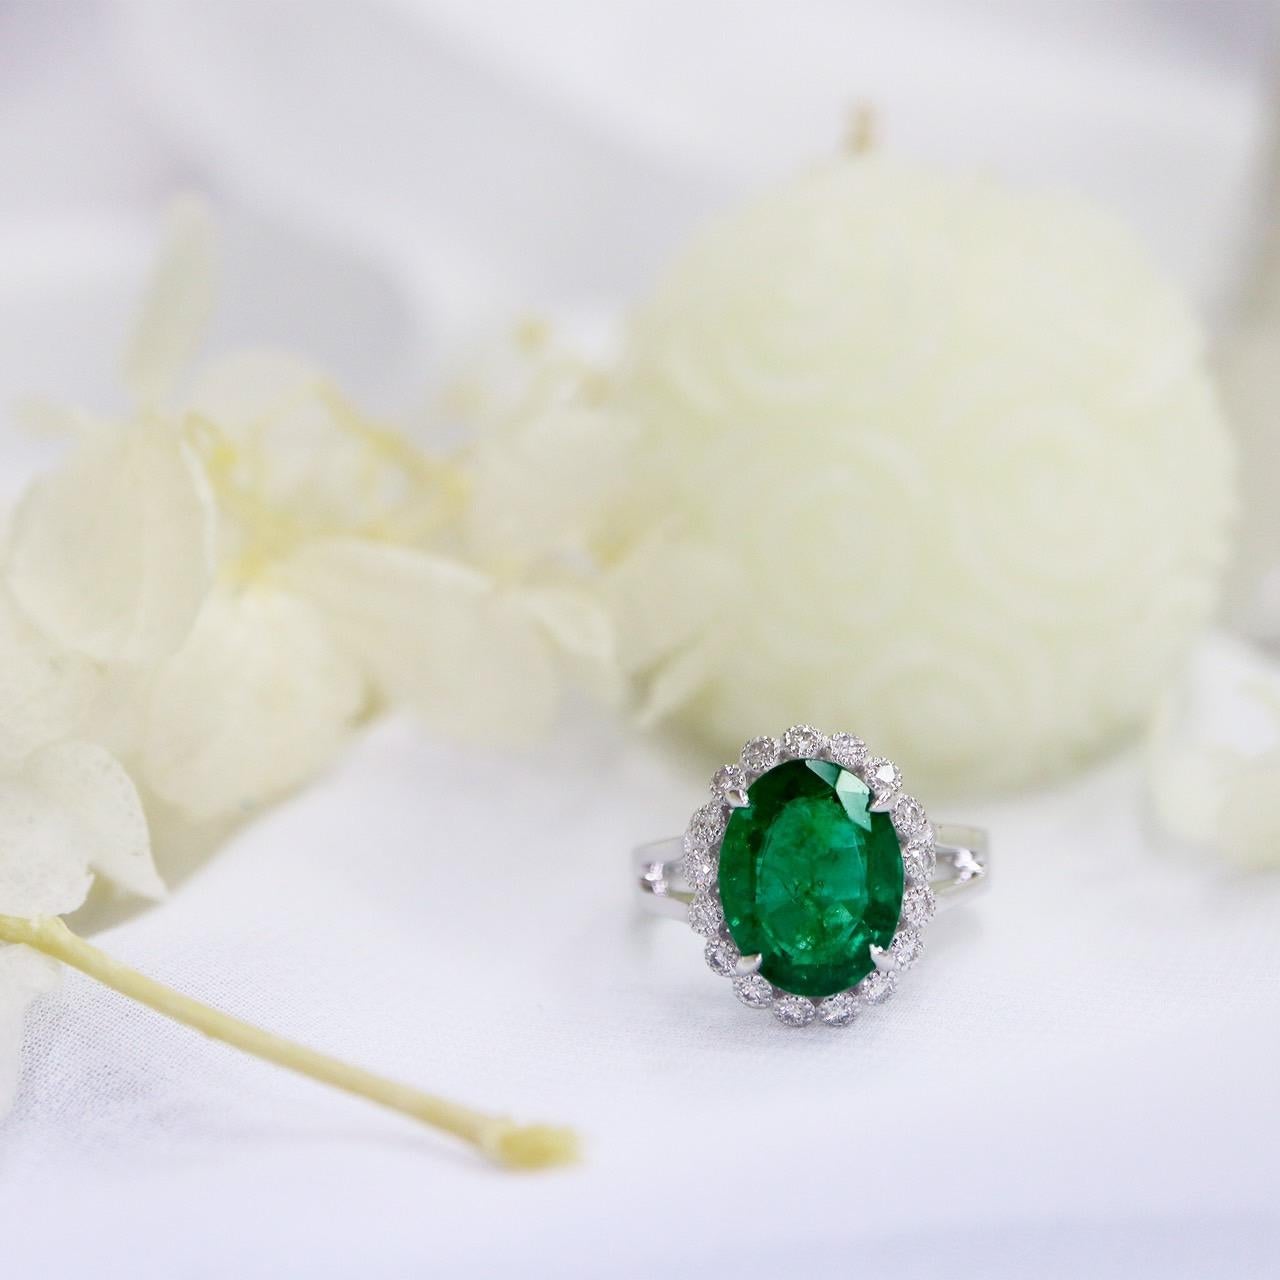 **18K IGI-Certified White Gold 3.59 ct Emerald⋄ Antique Art Deco Style Engagement Ring** 

This stunning ring features a 3.59 ct natural Emerald as the centerpiece, certified by IGI. It is set on an 18K white gold band with a halo design, adorned